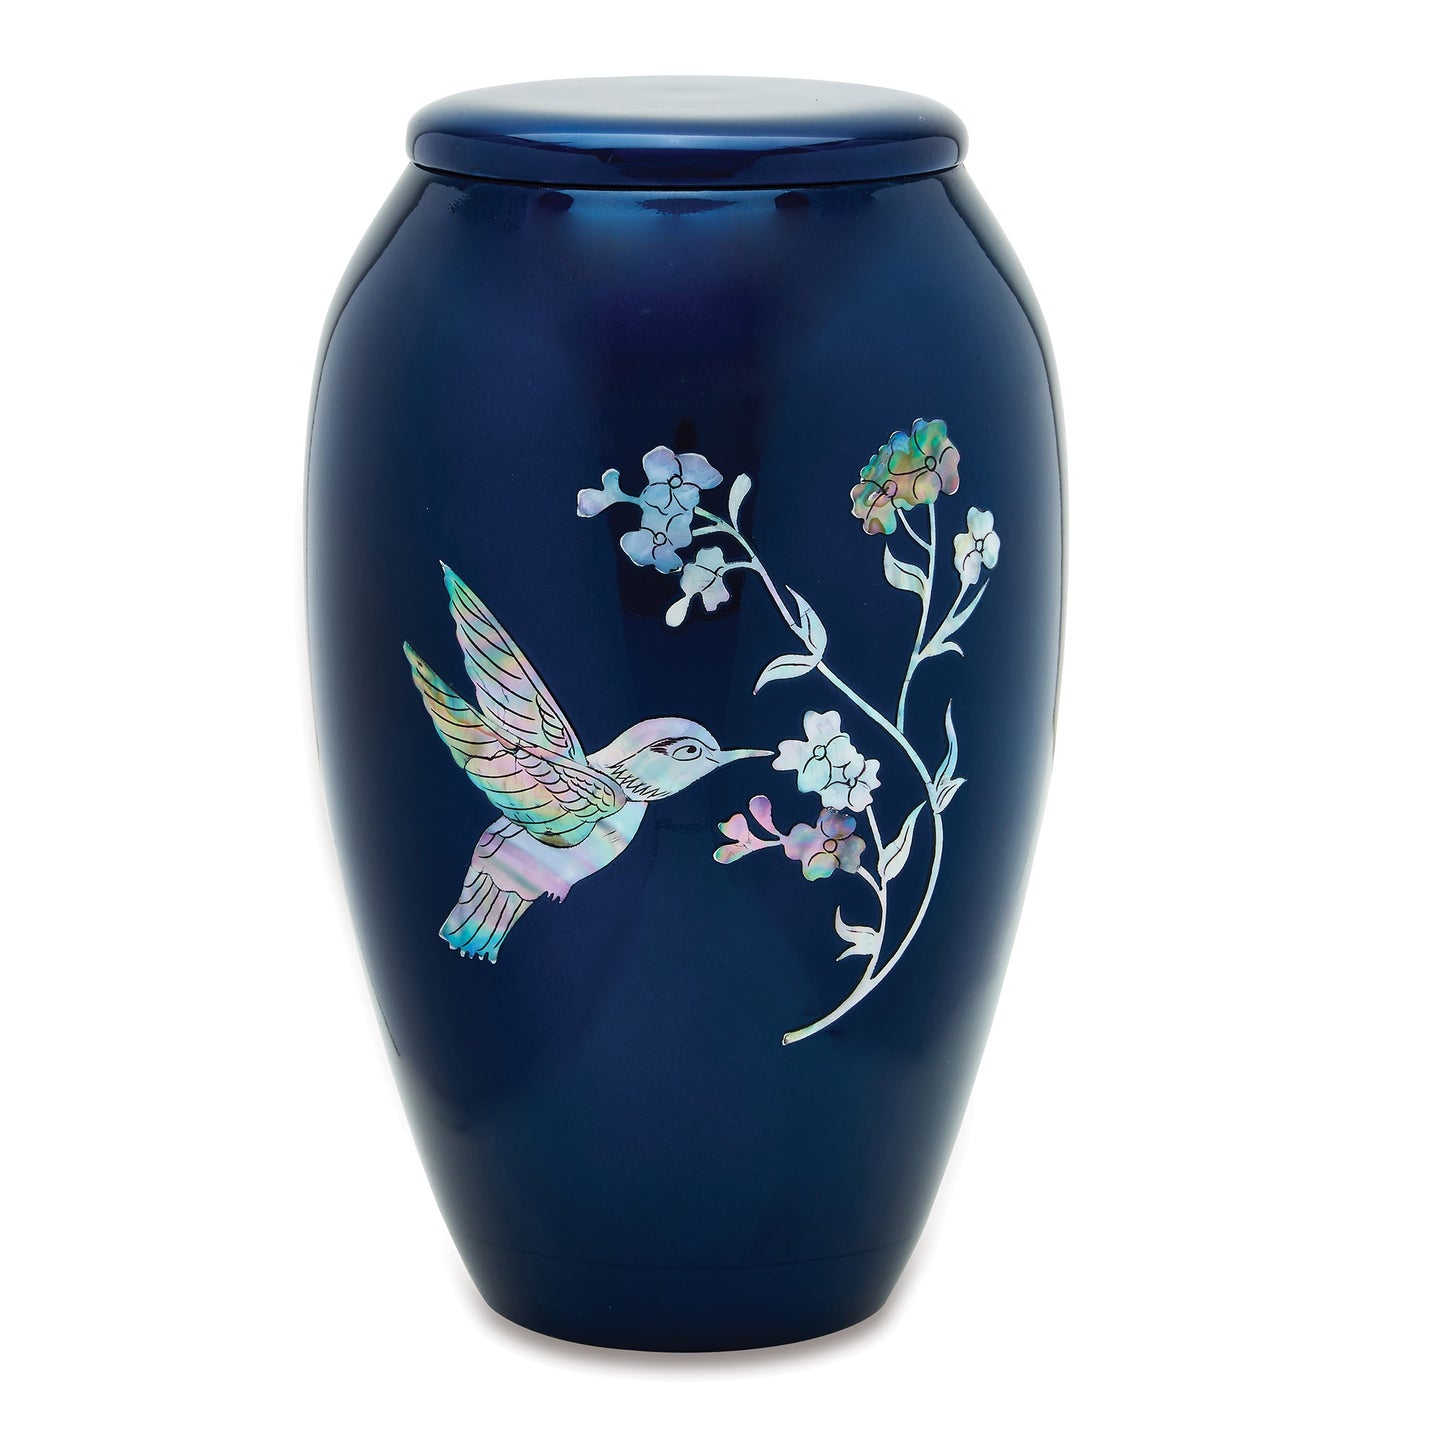 Blue Mother of Pearl Hummingbird Urn with Flowers.